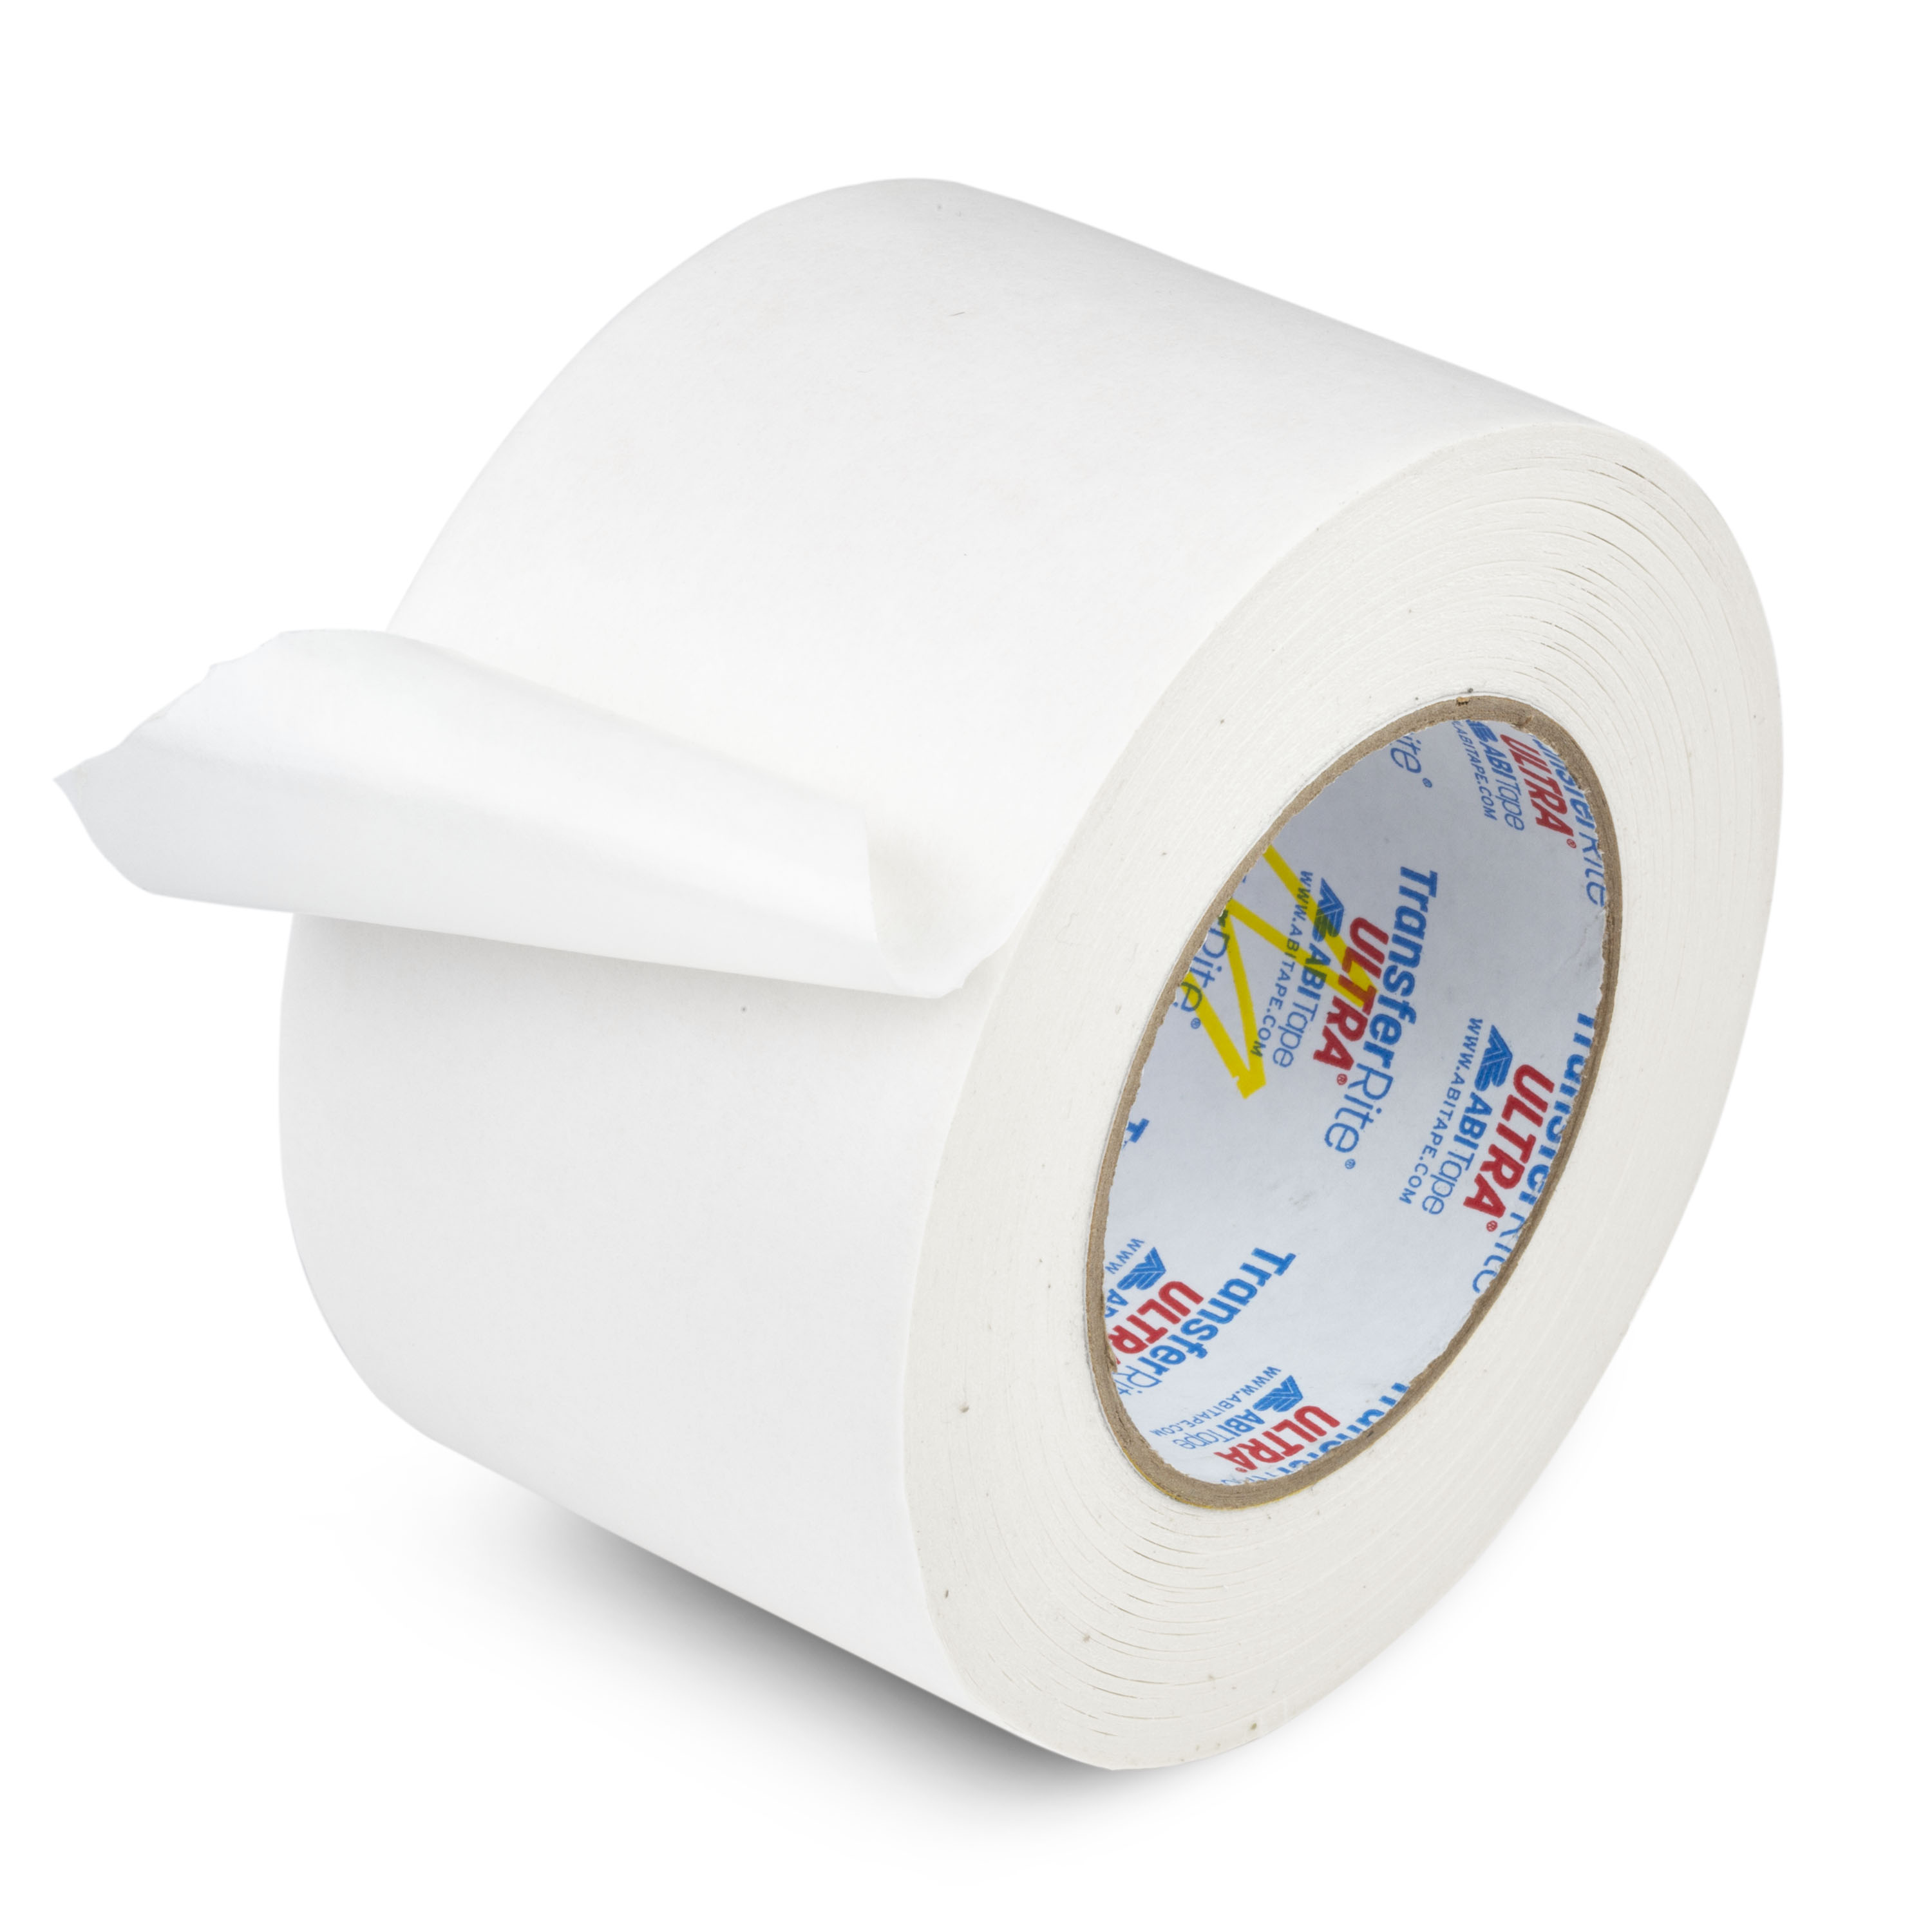 Double-Stick Tape, Standard from StewMac. StewMac